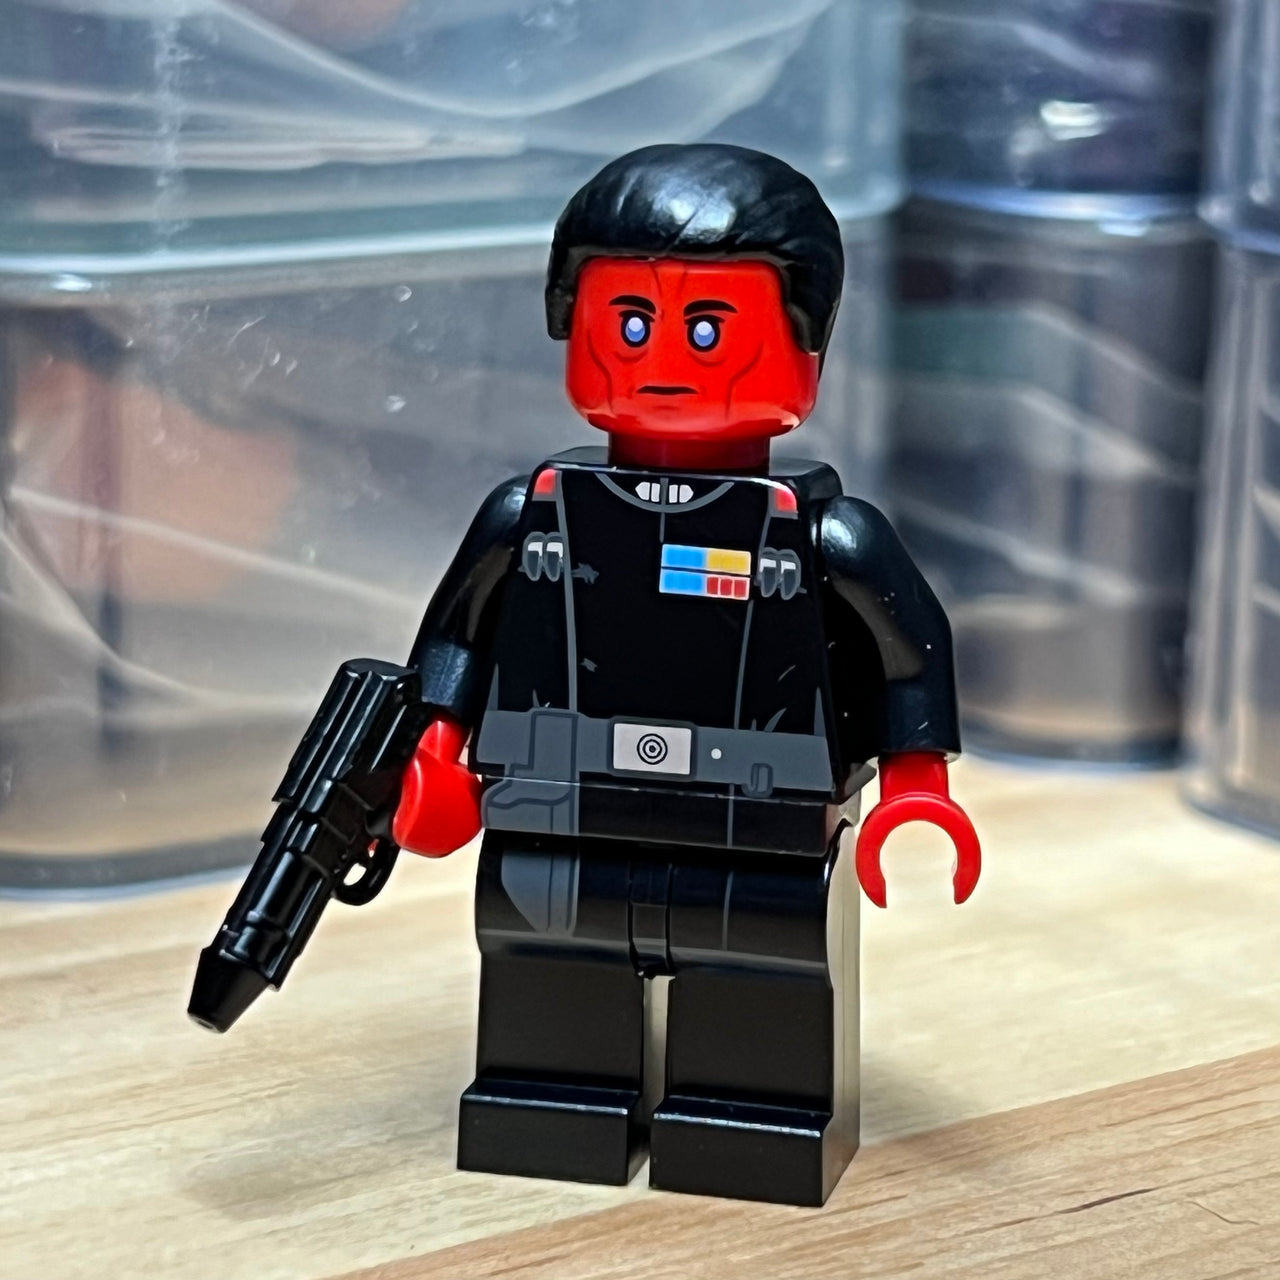 The Ruthless Admiral (BLACK BODY/RED HEAD VARIANT) by Jaka Brick + miniBIGS  [READY TO SHIP]